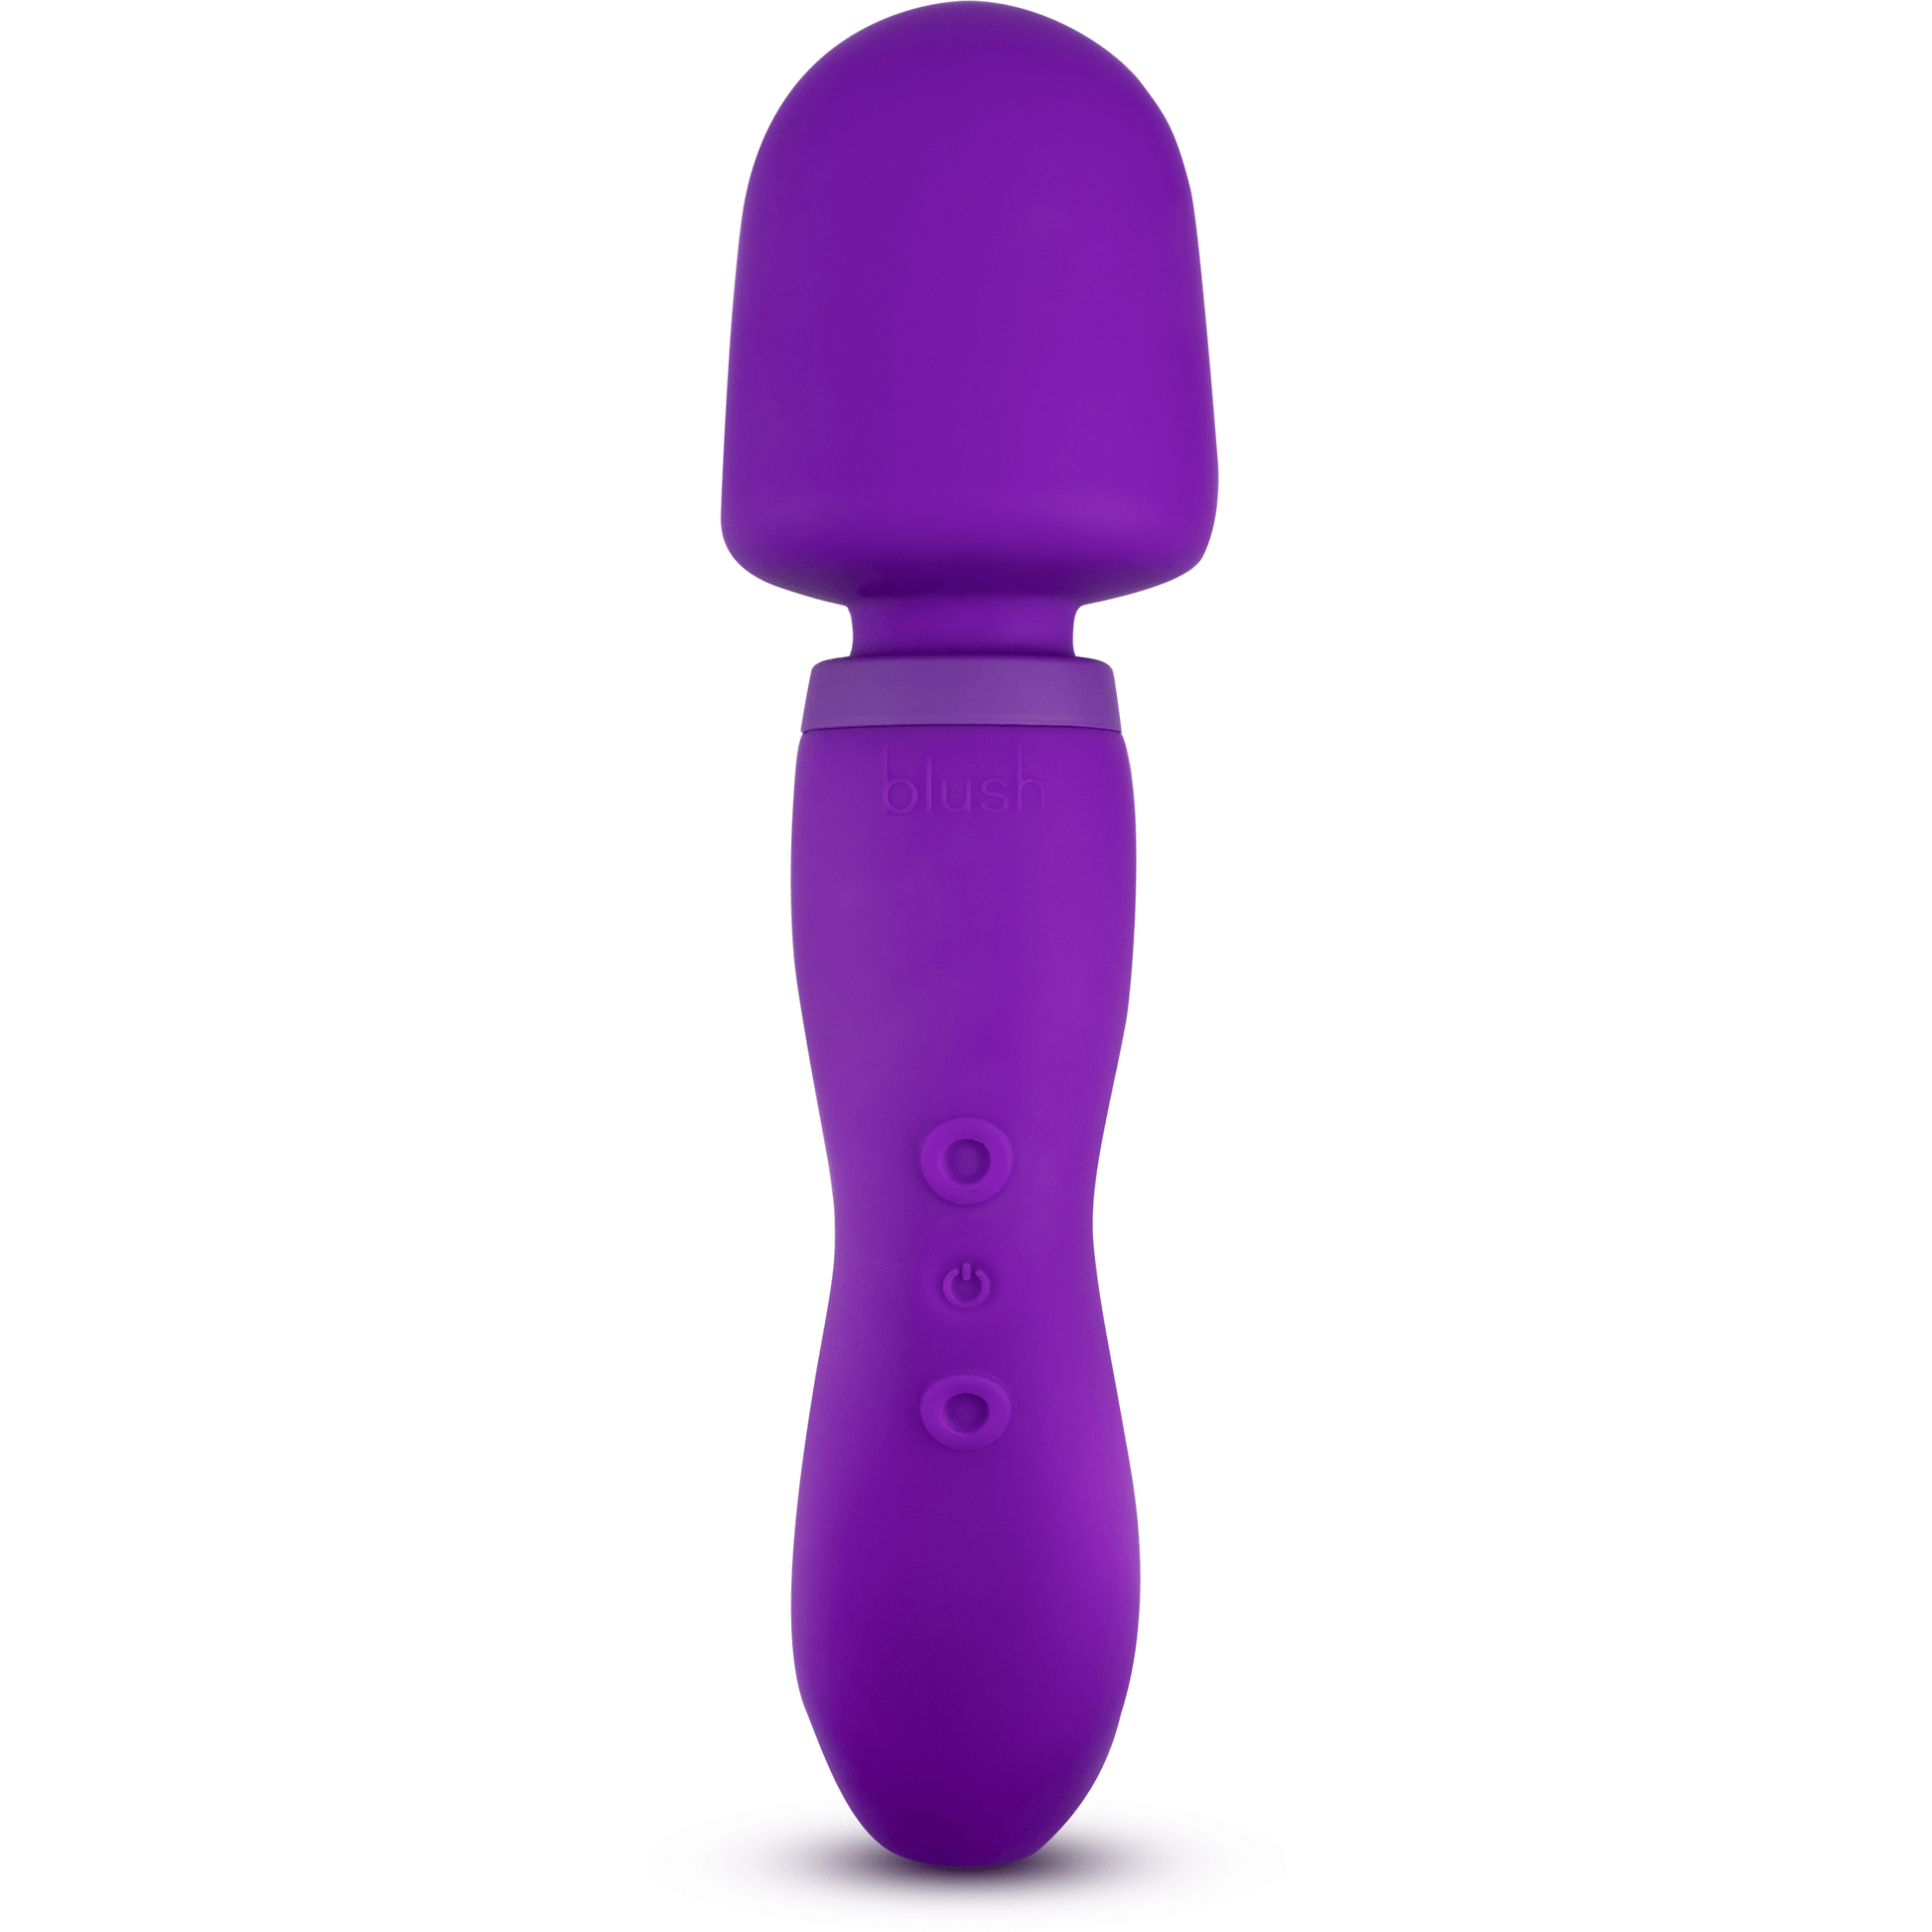 Blush Wellness Dual Sense Double Ended Ergonomic Wand - by The Bigger O online sex toy shop. USA, Canada and UK shipping available.